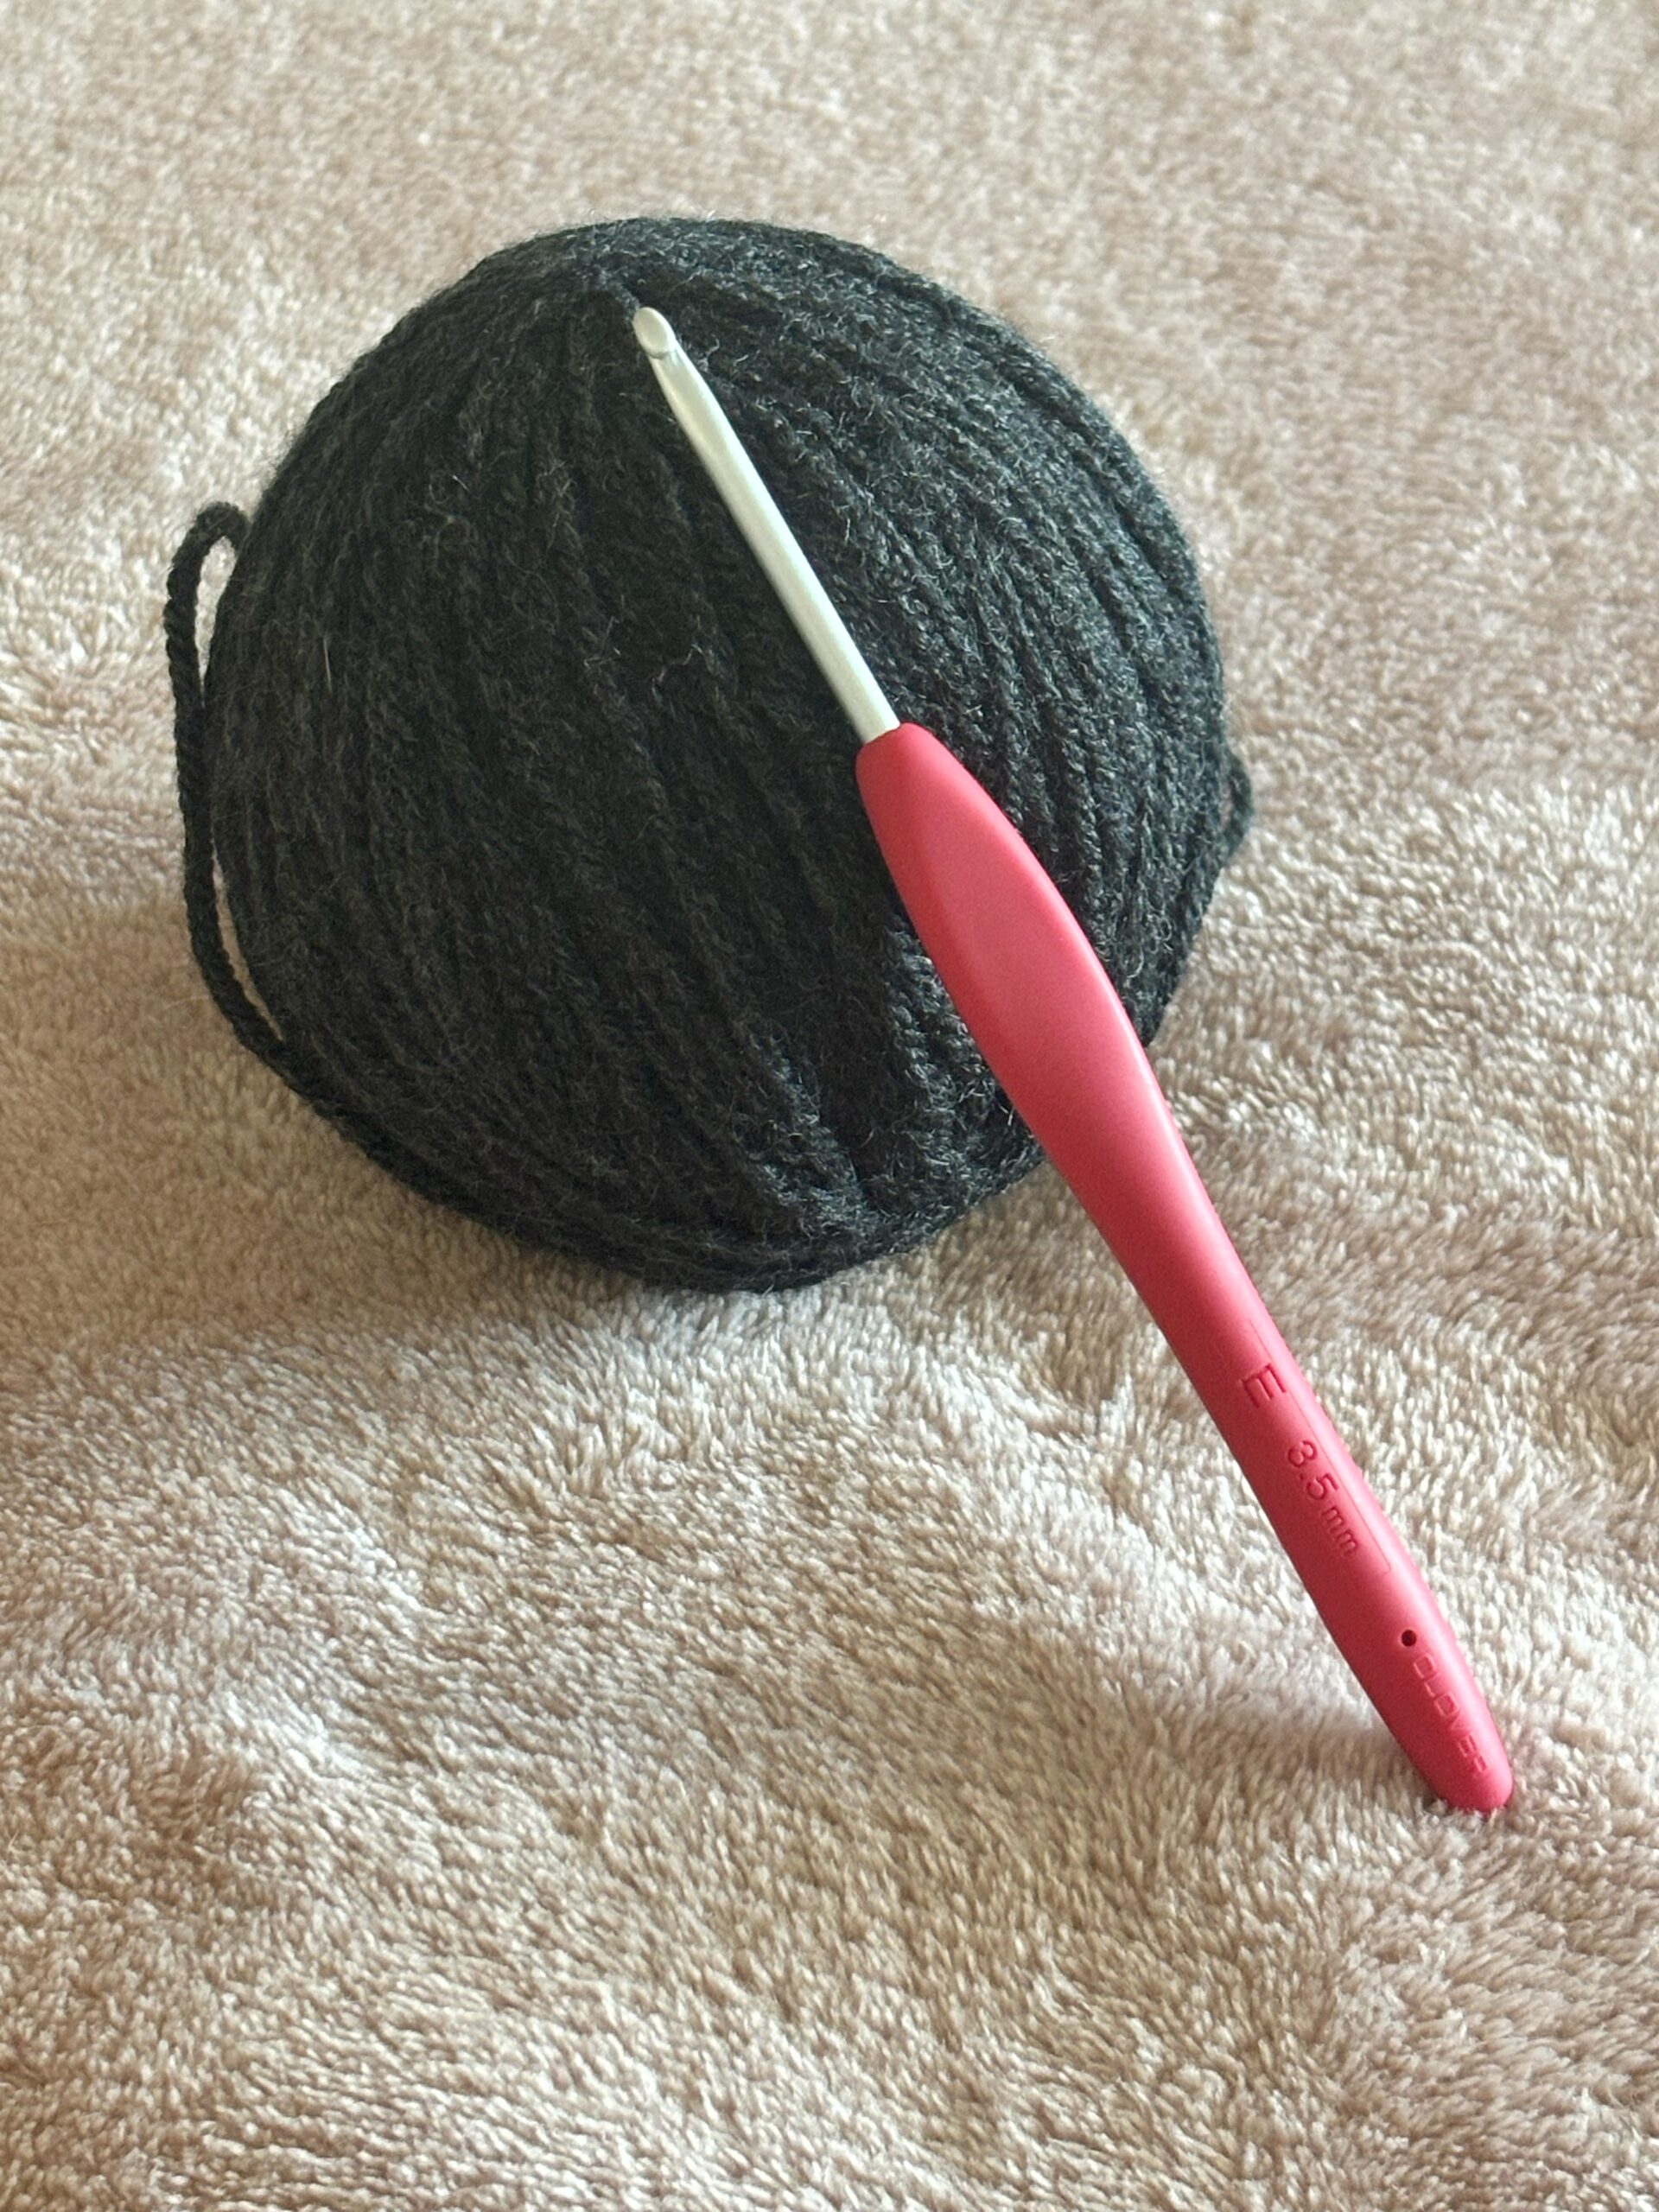 Yarn and hook for how to get started with amigurumi